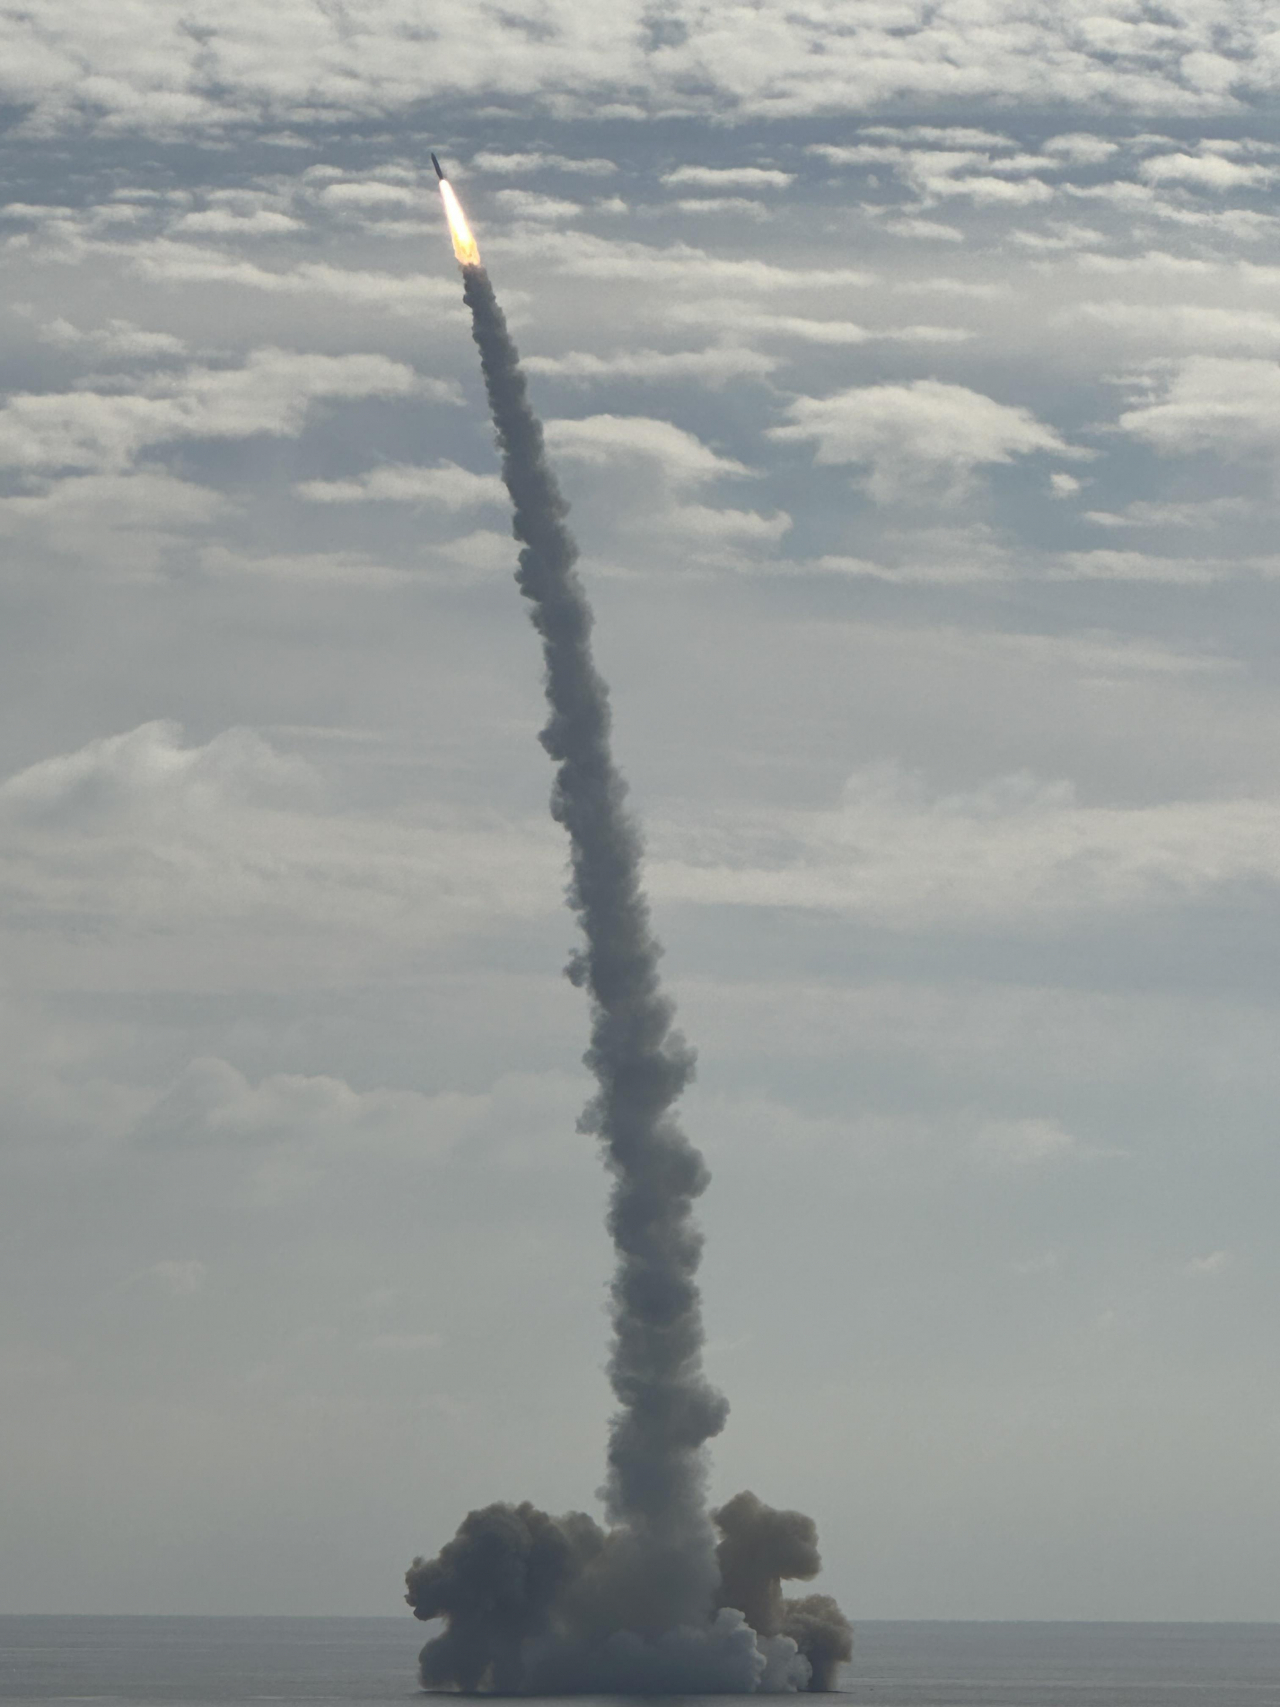 A solid-fuel space launch vehicle developed by the state-run Agency for Defense Development and equipped with a small satellite manufactured by Hanwha Systems takes off from a barge in waters off Jeju Island on Monday afternoon. (Hanwha Systems)